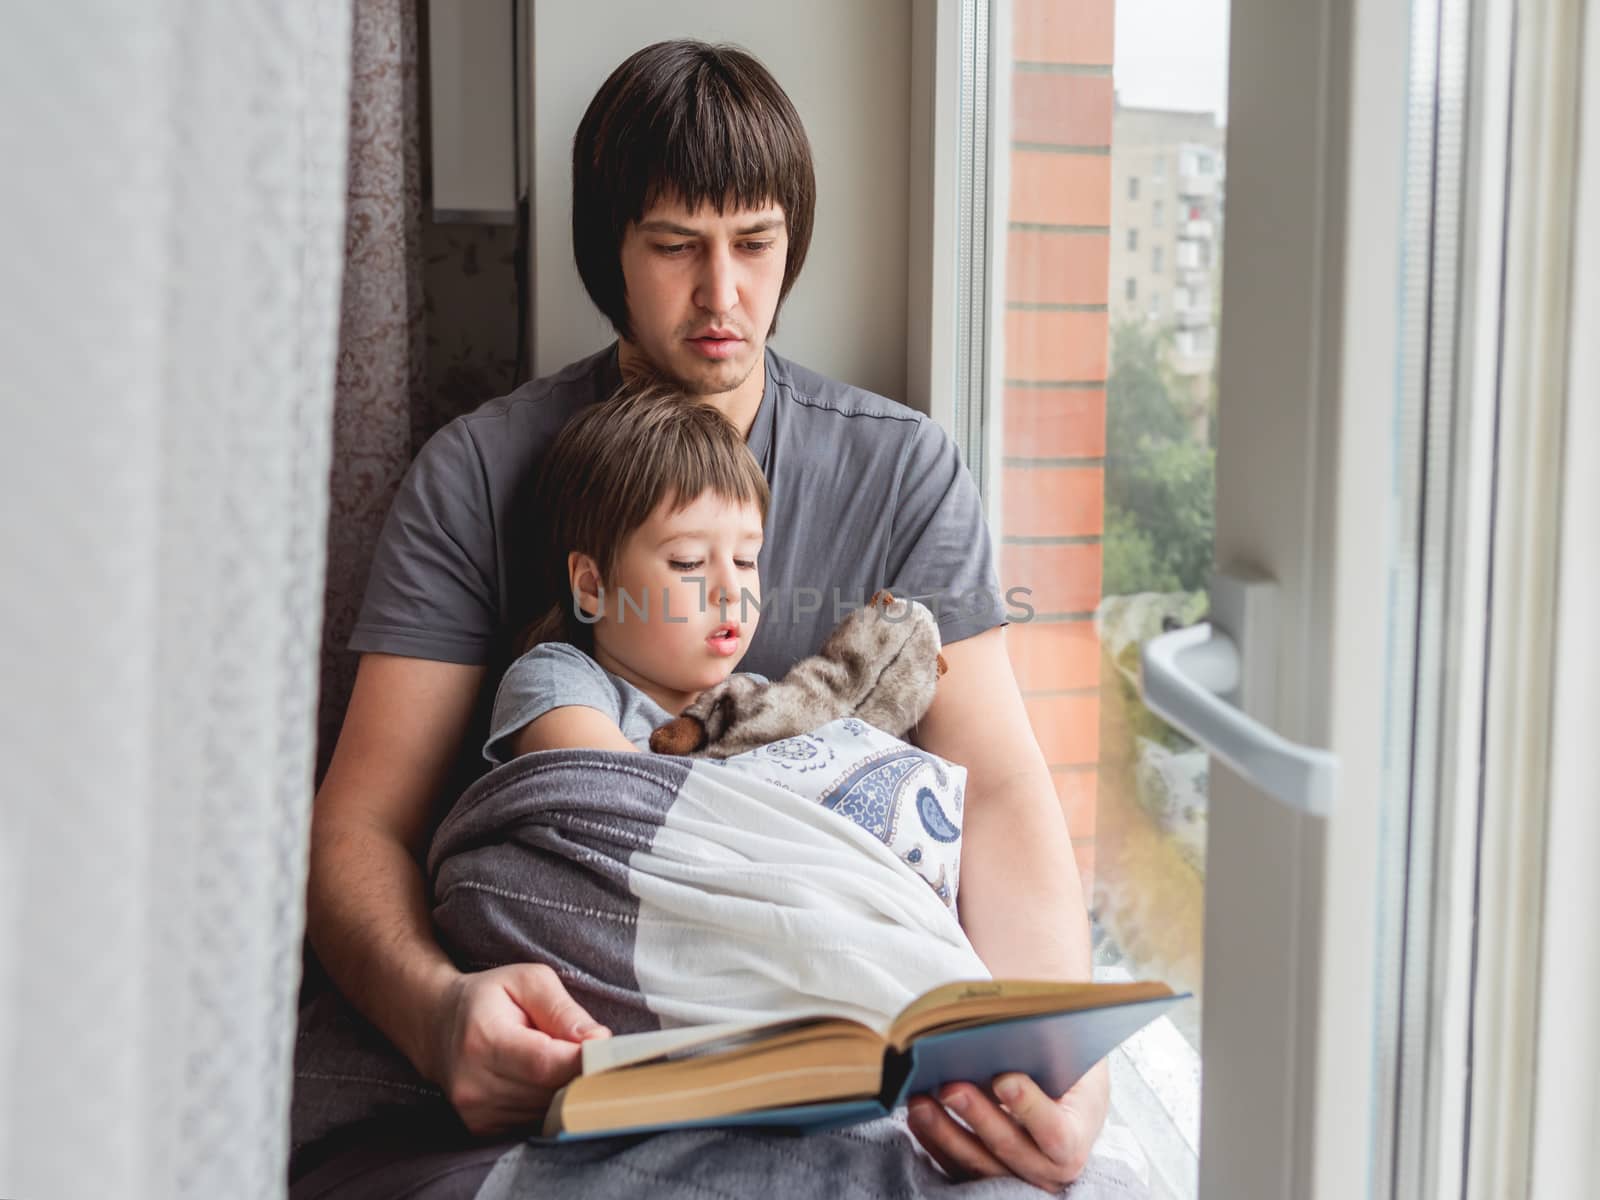 Father reads book to his son. Cozy family time on windowsill while raining outside. Toddler boy sits together with fluffy toy cover himself with a blanket.